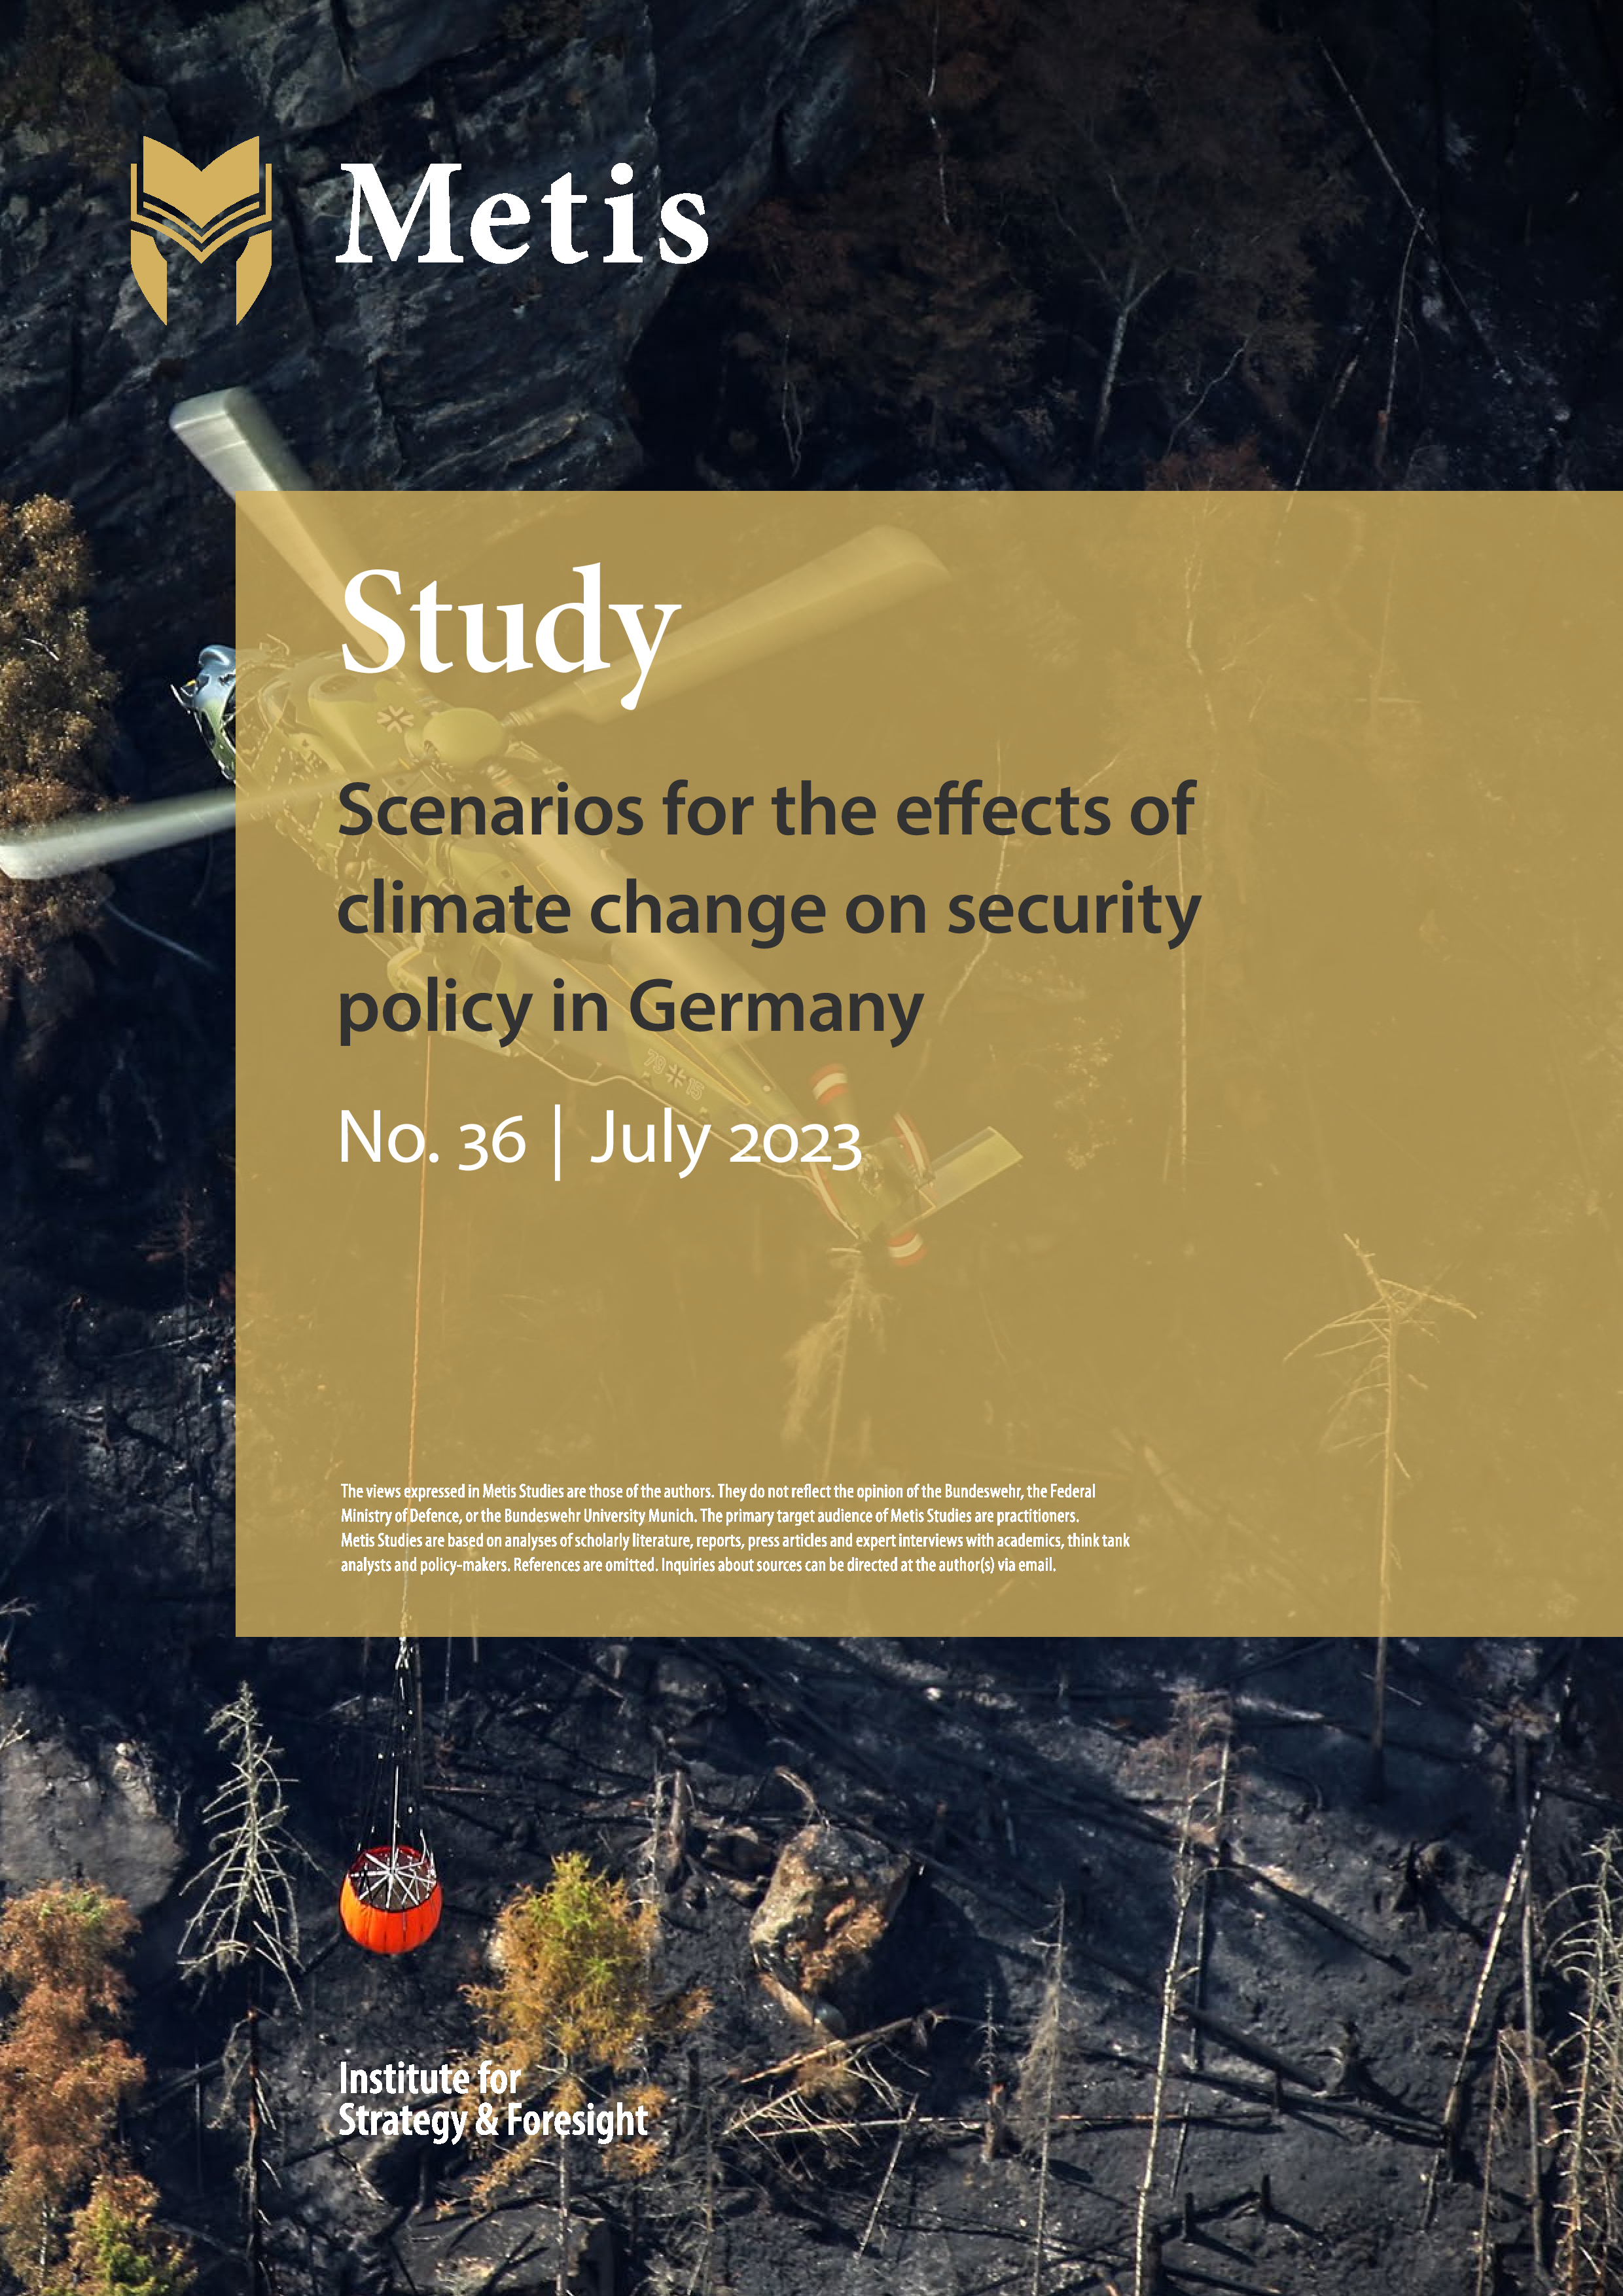 Scenarios for the effects of climate change on security policy in Germany